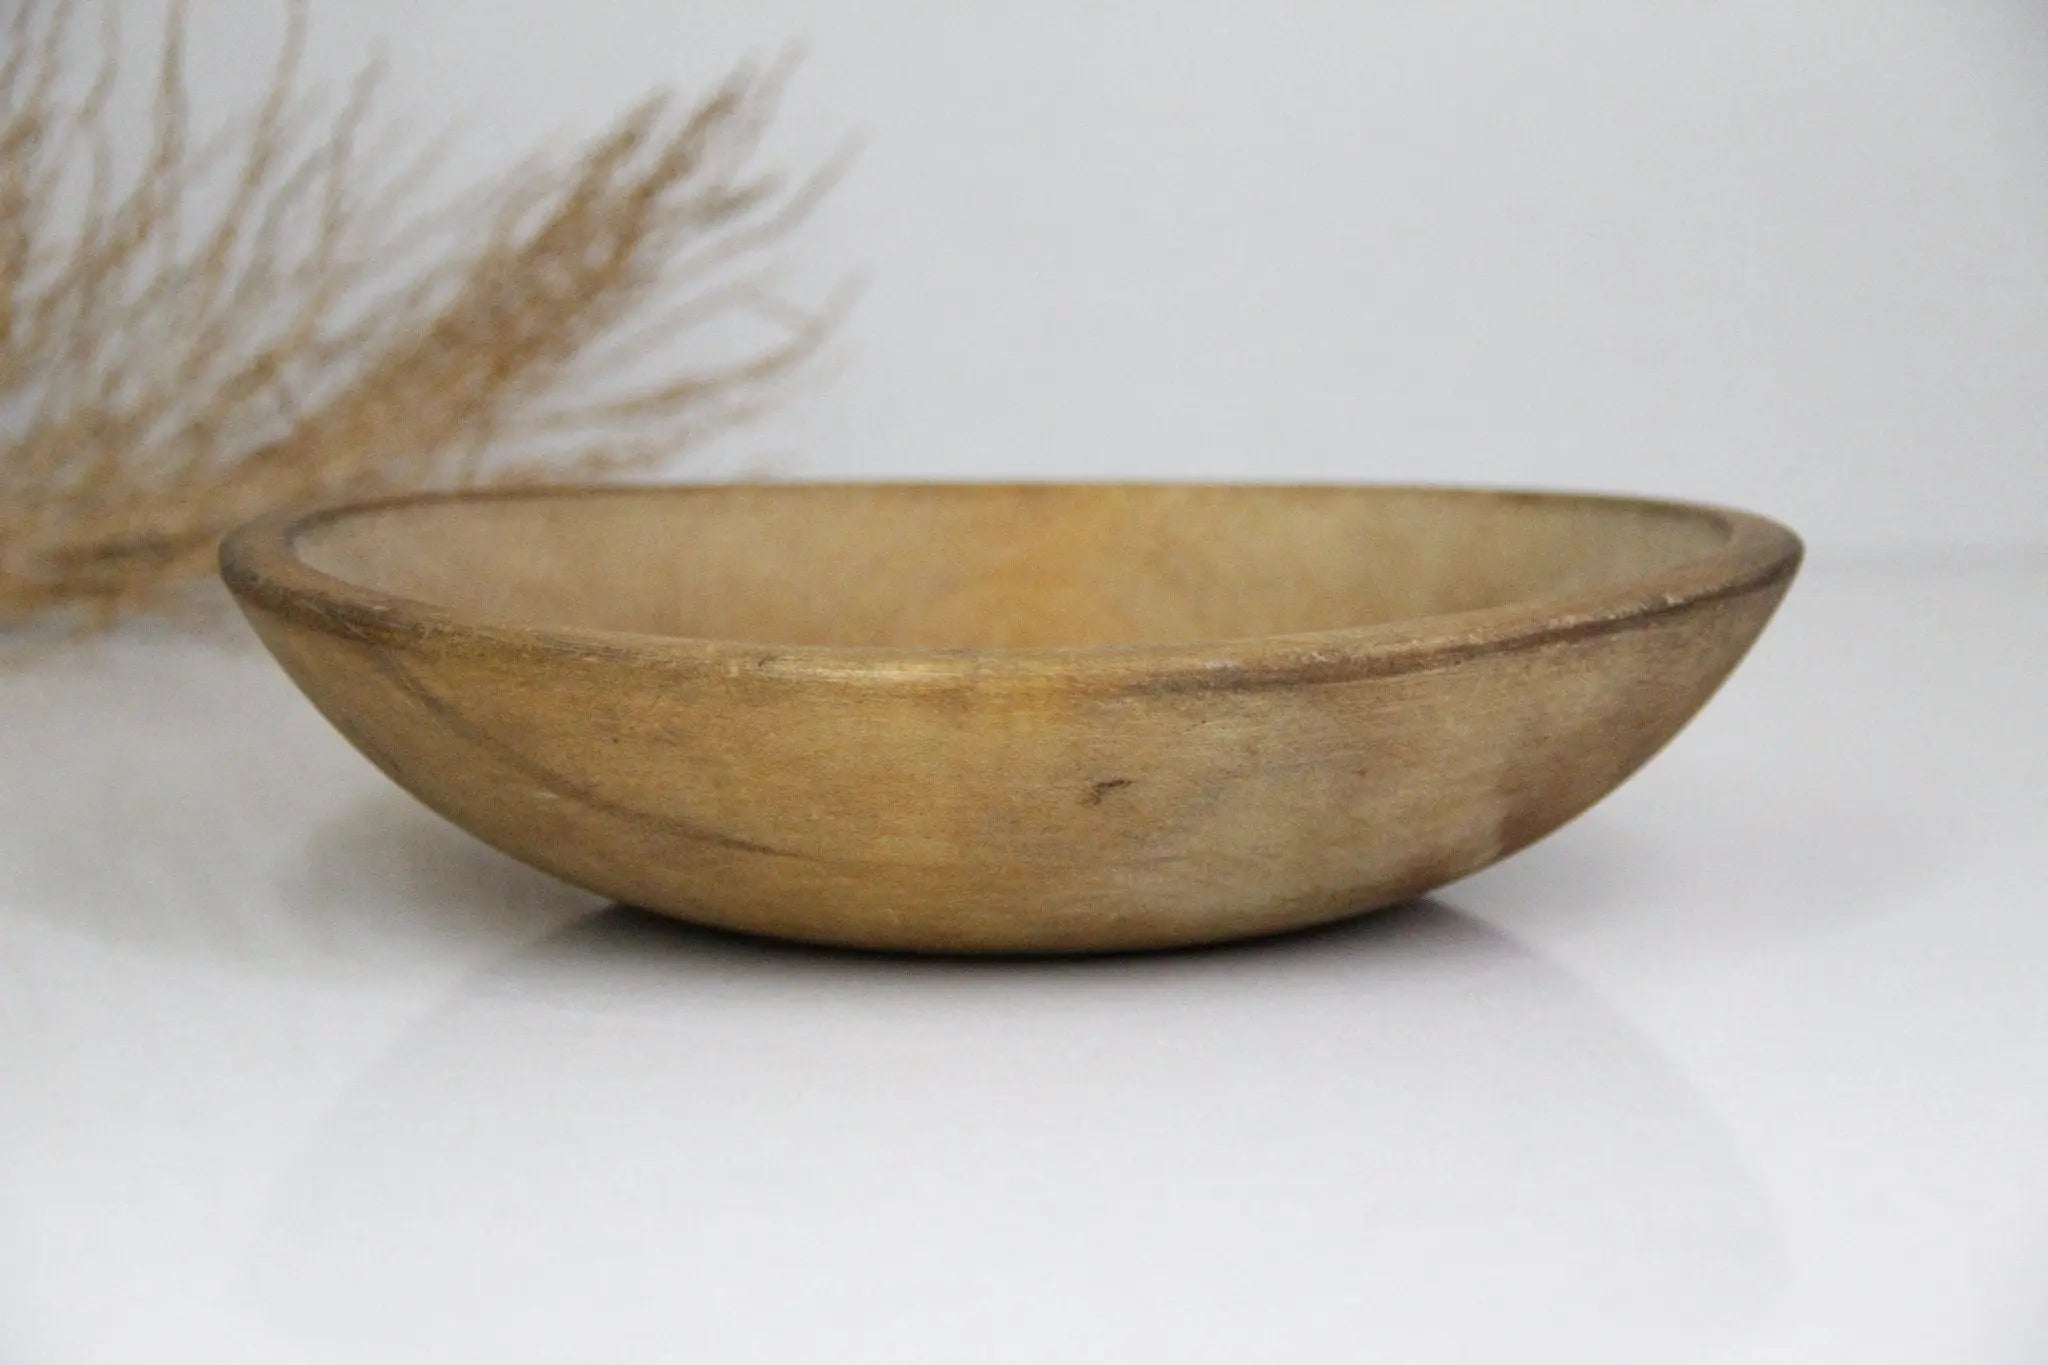 Munising-Wooden-Bowls-A-Journey-Through-Time-and-Care Debra Hall Lifestyle